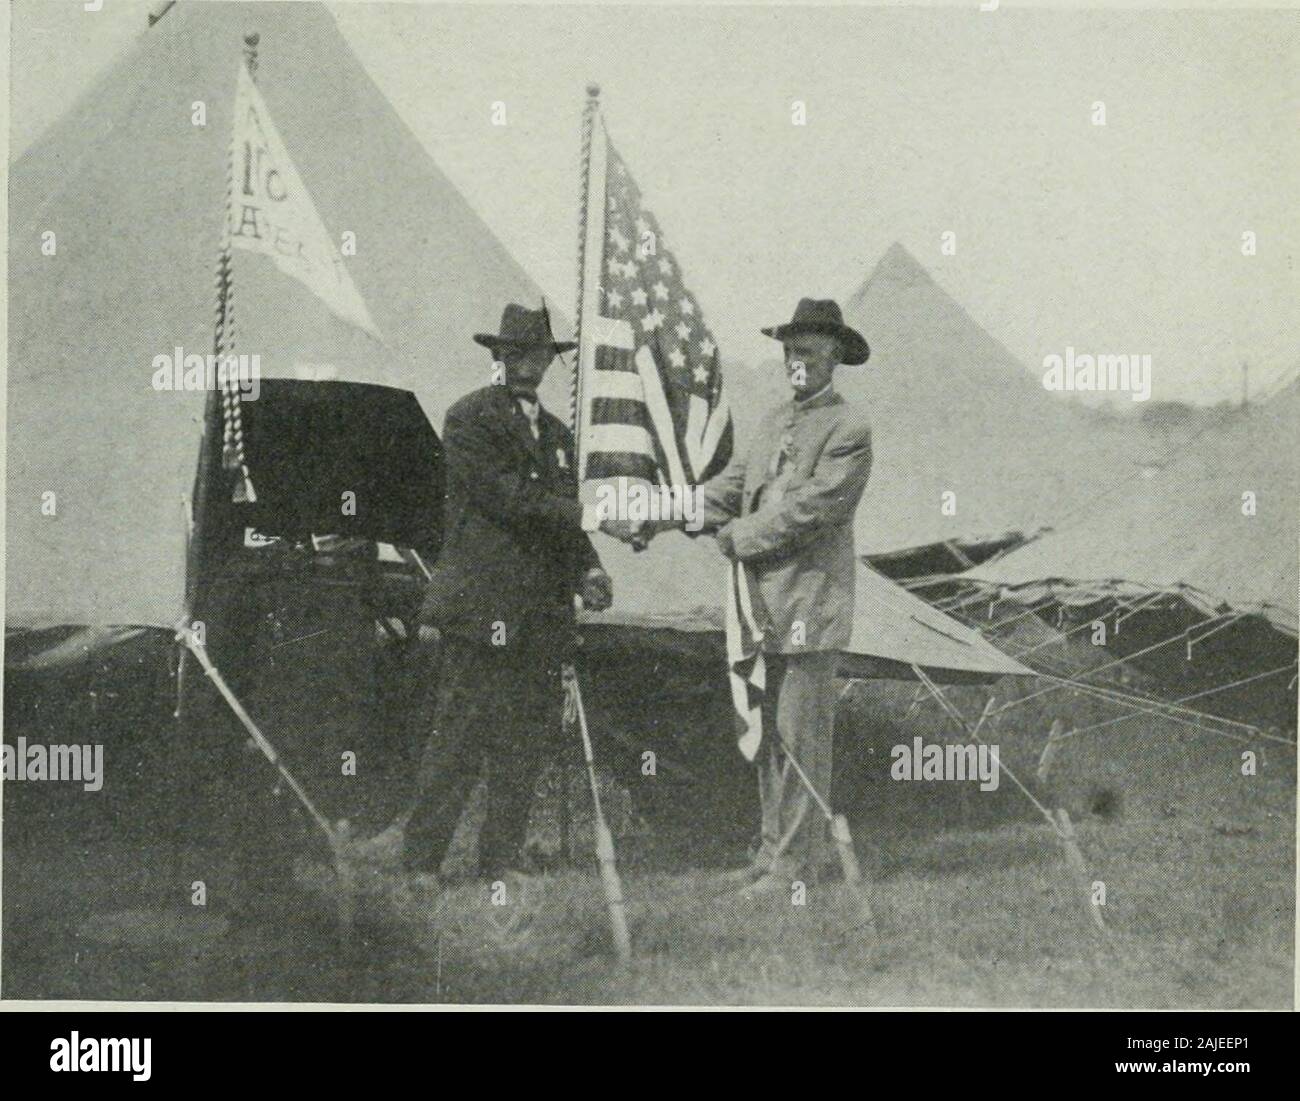 Pennsylvania at Gettysburg : ceremonies at the dedication of the monuments erected by the Commonwealth of Pennsylvania to Major General George G Meade, Major General Winfield S Hancock, Major General John F Reynolds and to mark the positions of the Pennsylvania commands engaged in the battle . Comrades, Hand-in-hand.. TiiEiK Flag Now. Stock Photo